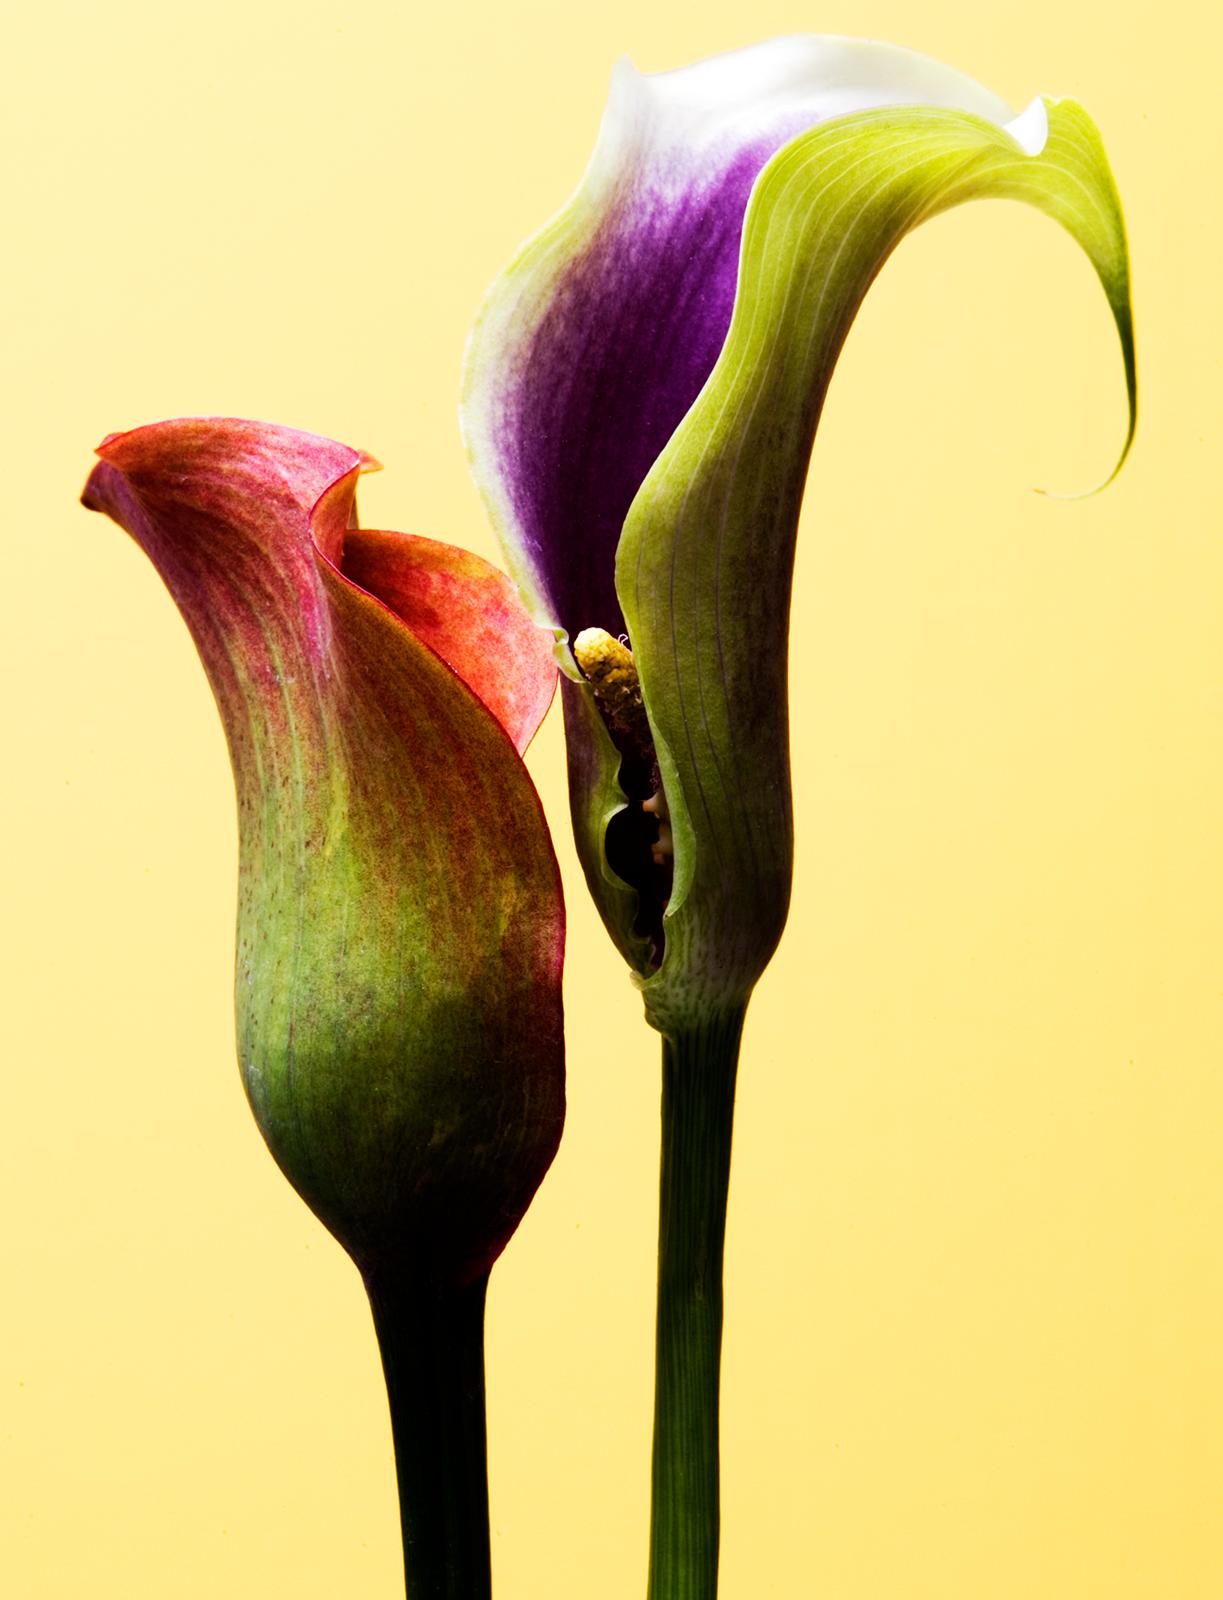 Flowers - Signed limited edition fine art print, Color nature photography - Photograph by Ian Sanderson